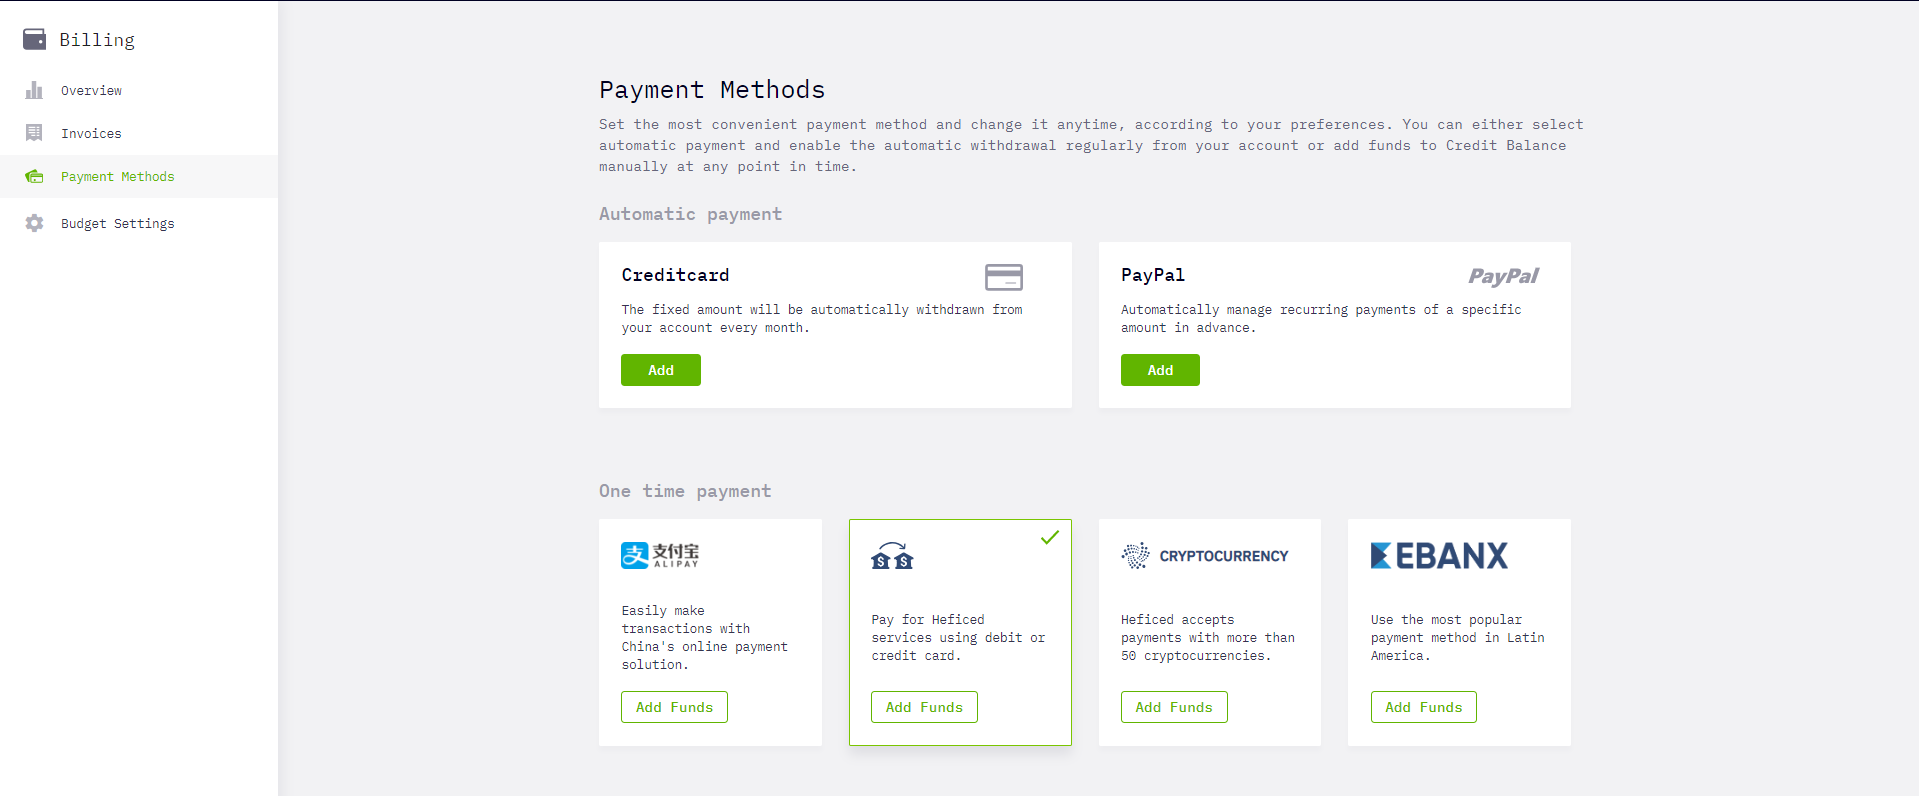 Payment Methods menu with Automatic payment and One time payment options.